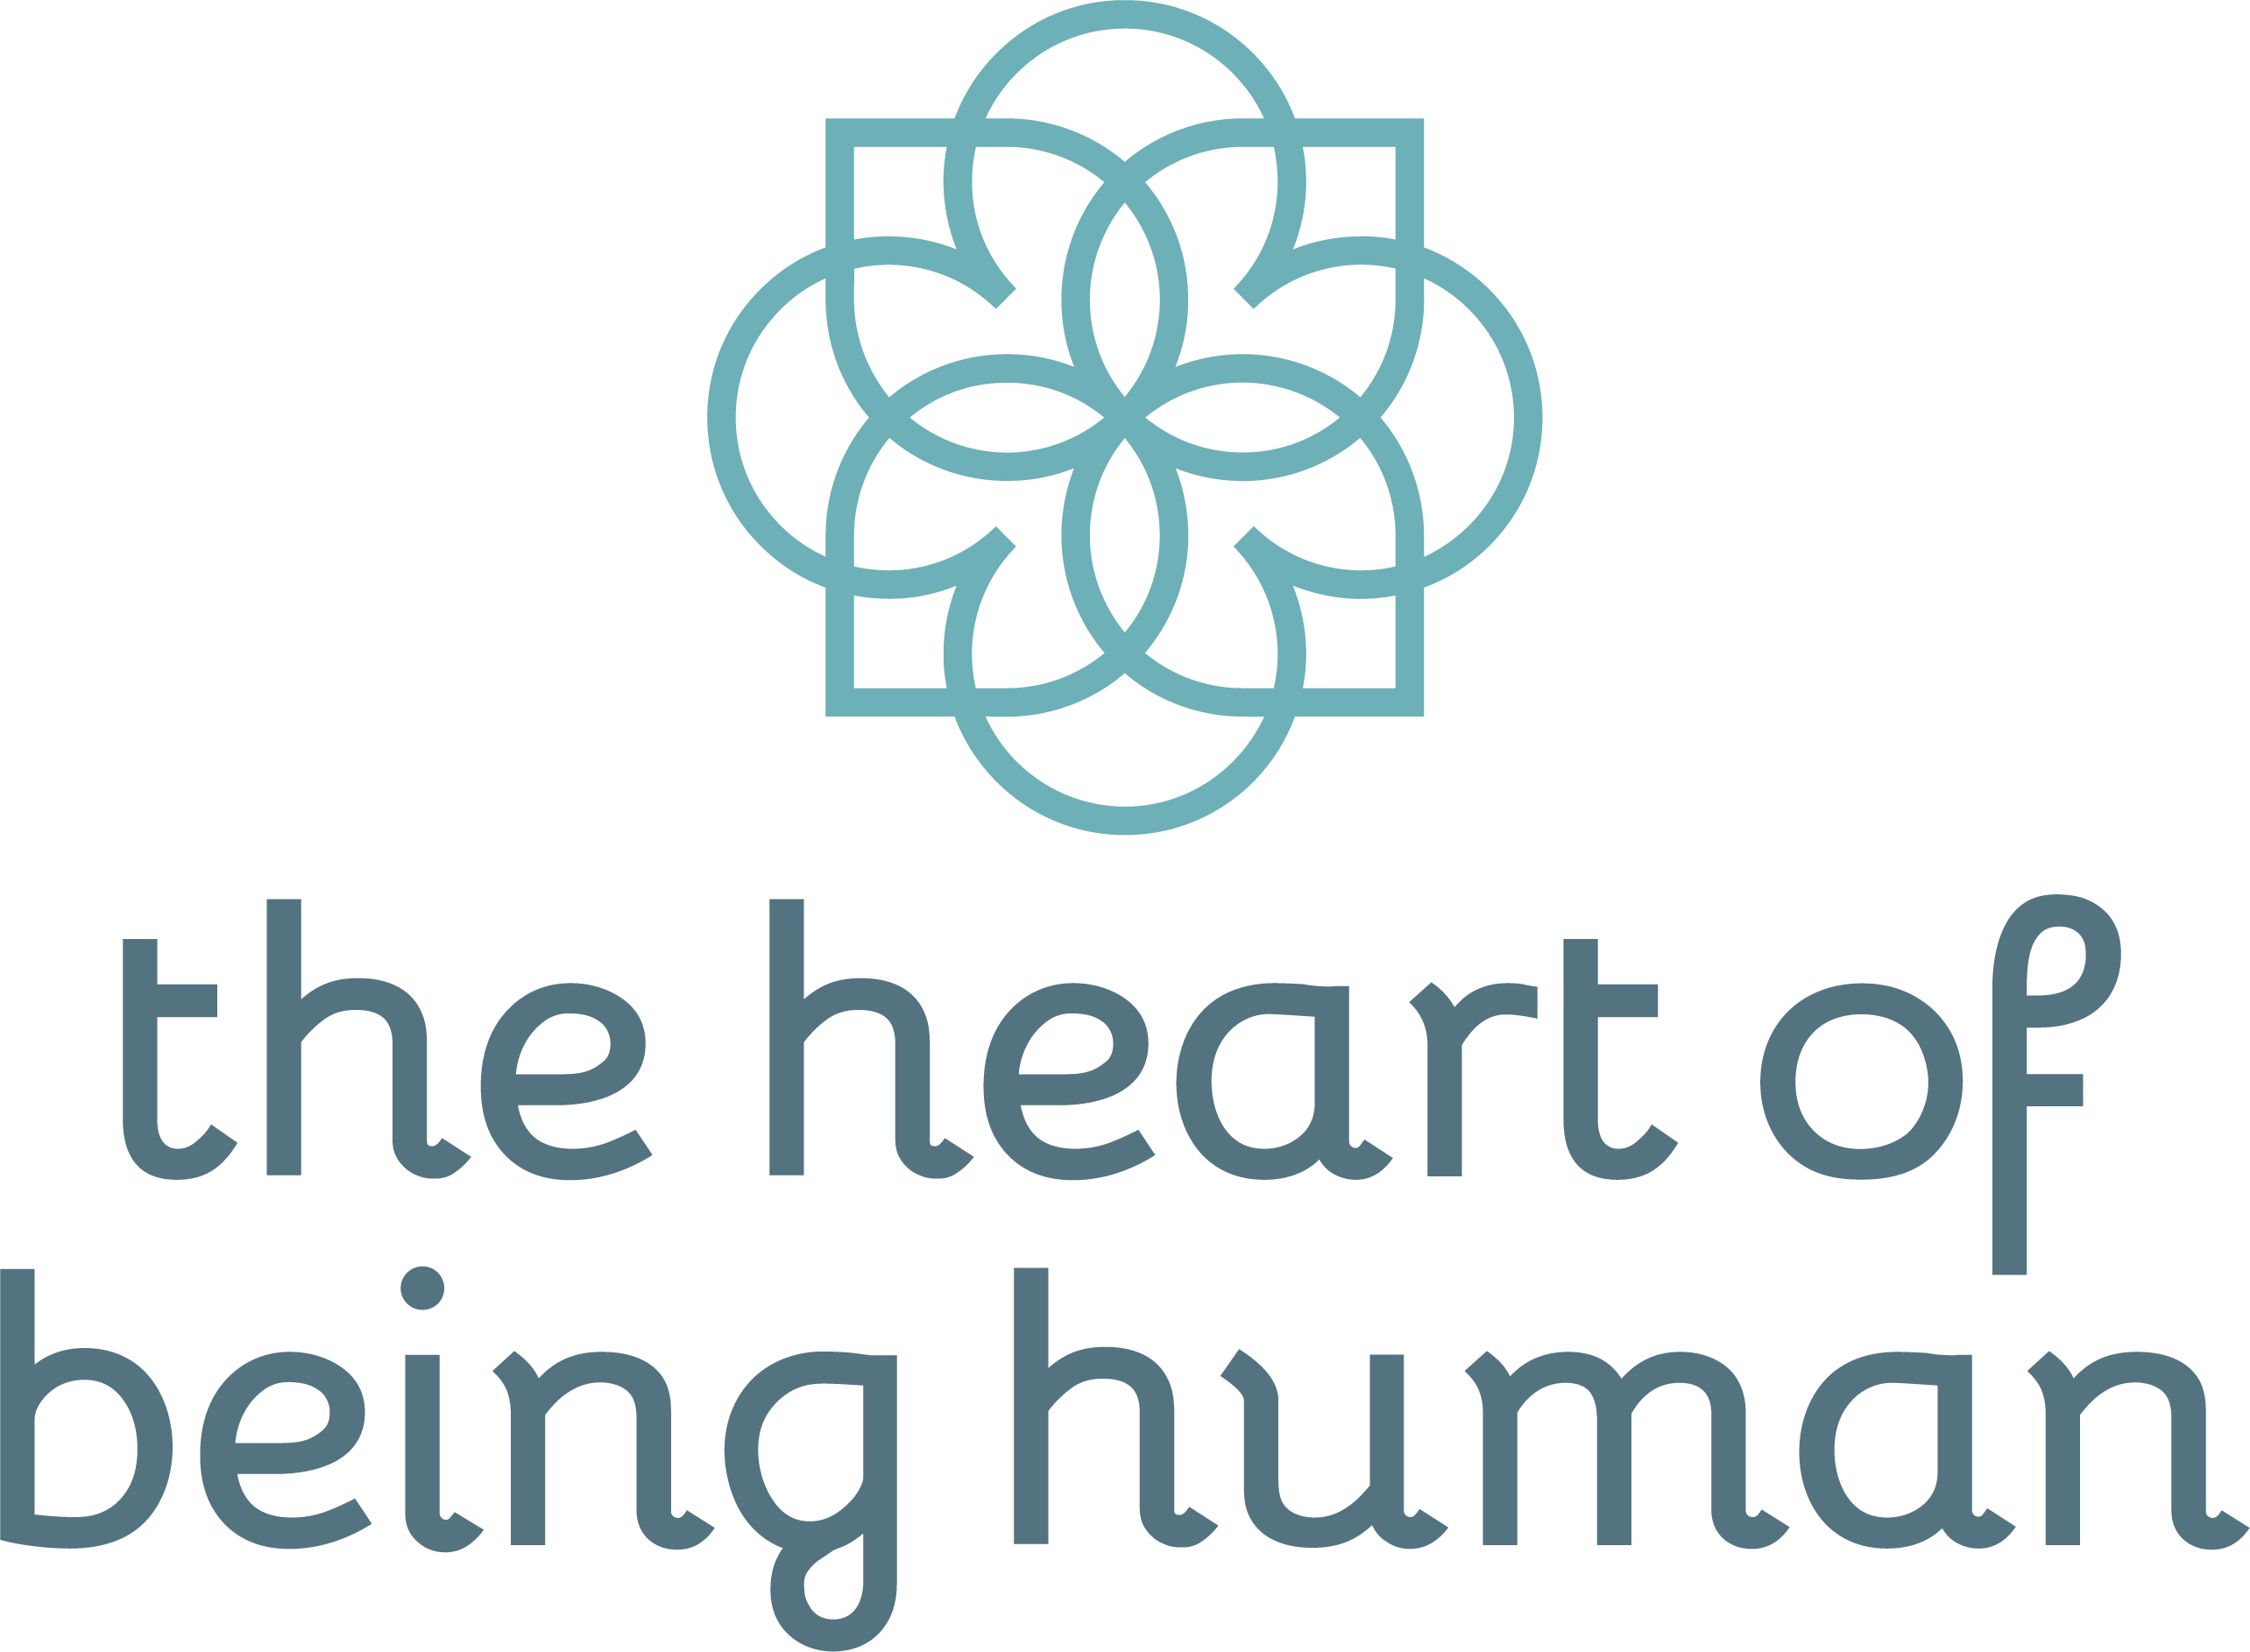 The Heart of Being Human